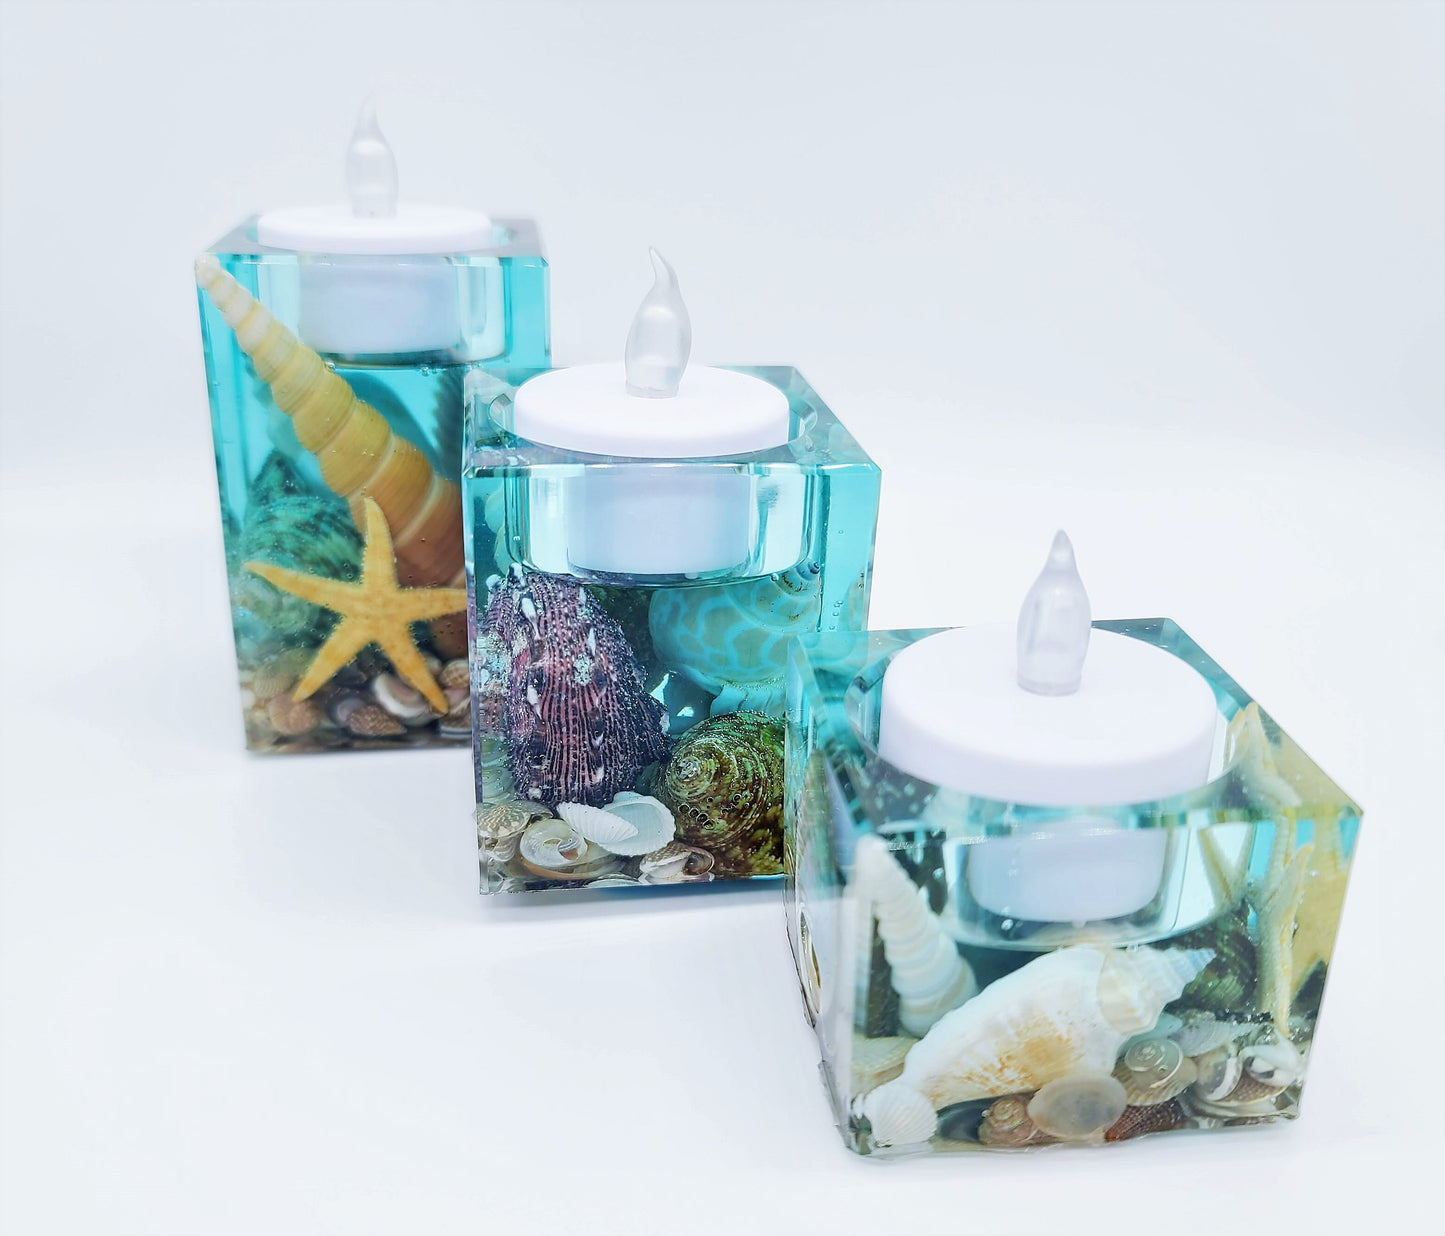 Ocean Themed Square Candle Holder Made w/ Eco-Friendly Epoxy Resin & Seashells - Includes Choice of Real UNSCENTED Tealight or LED Tealight